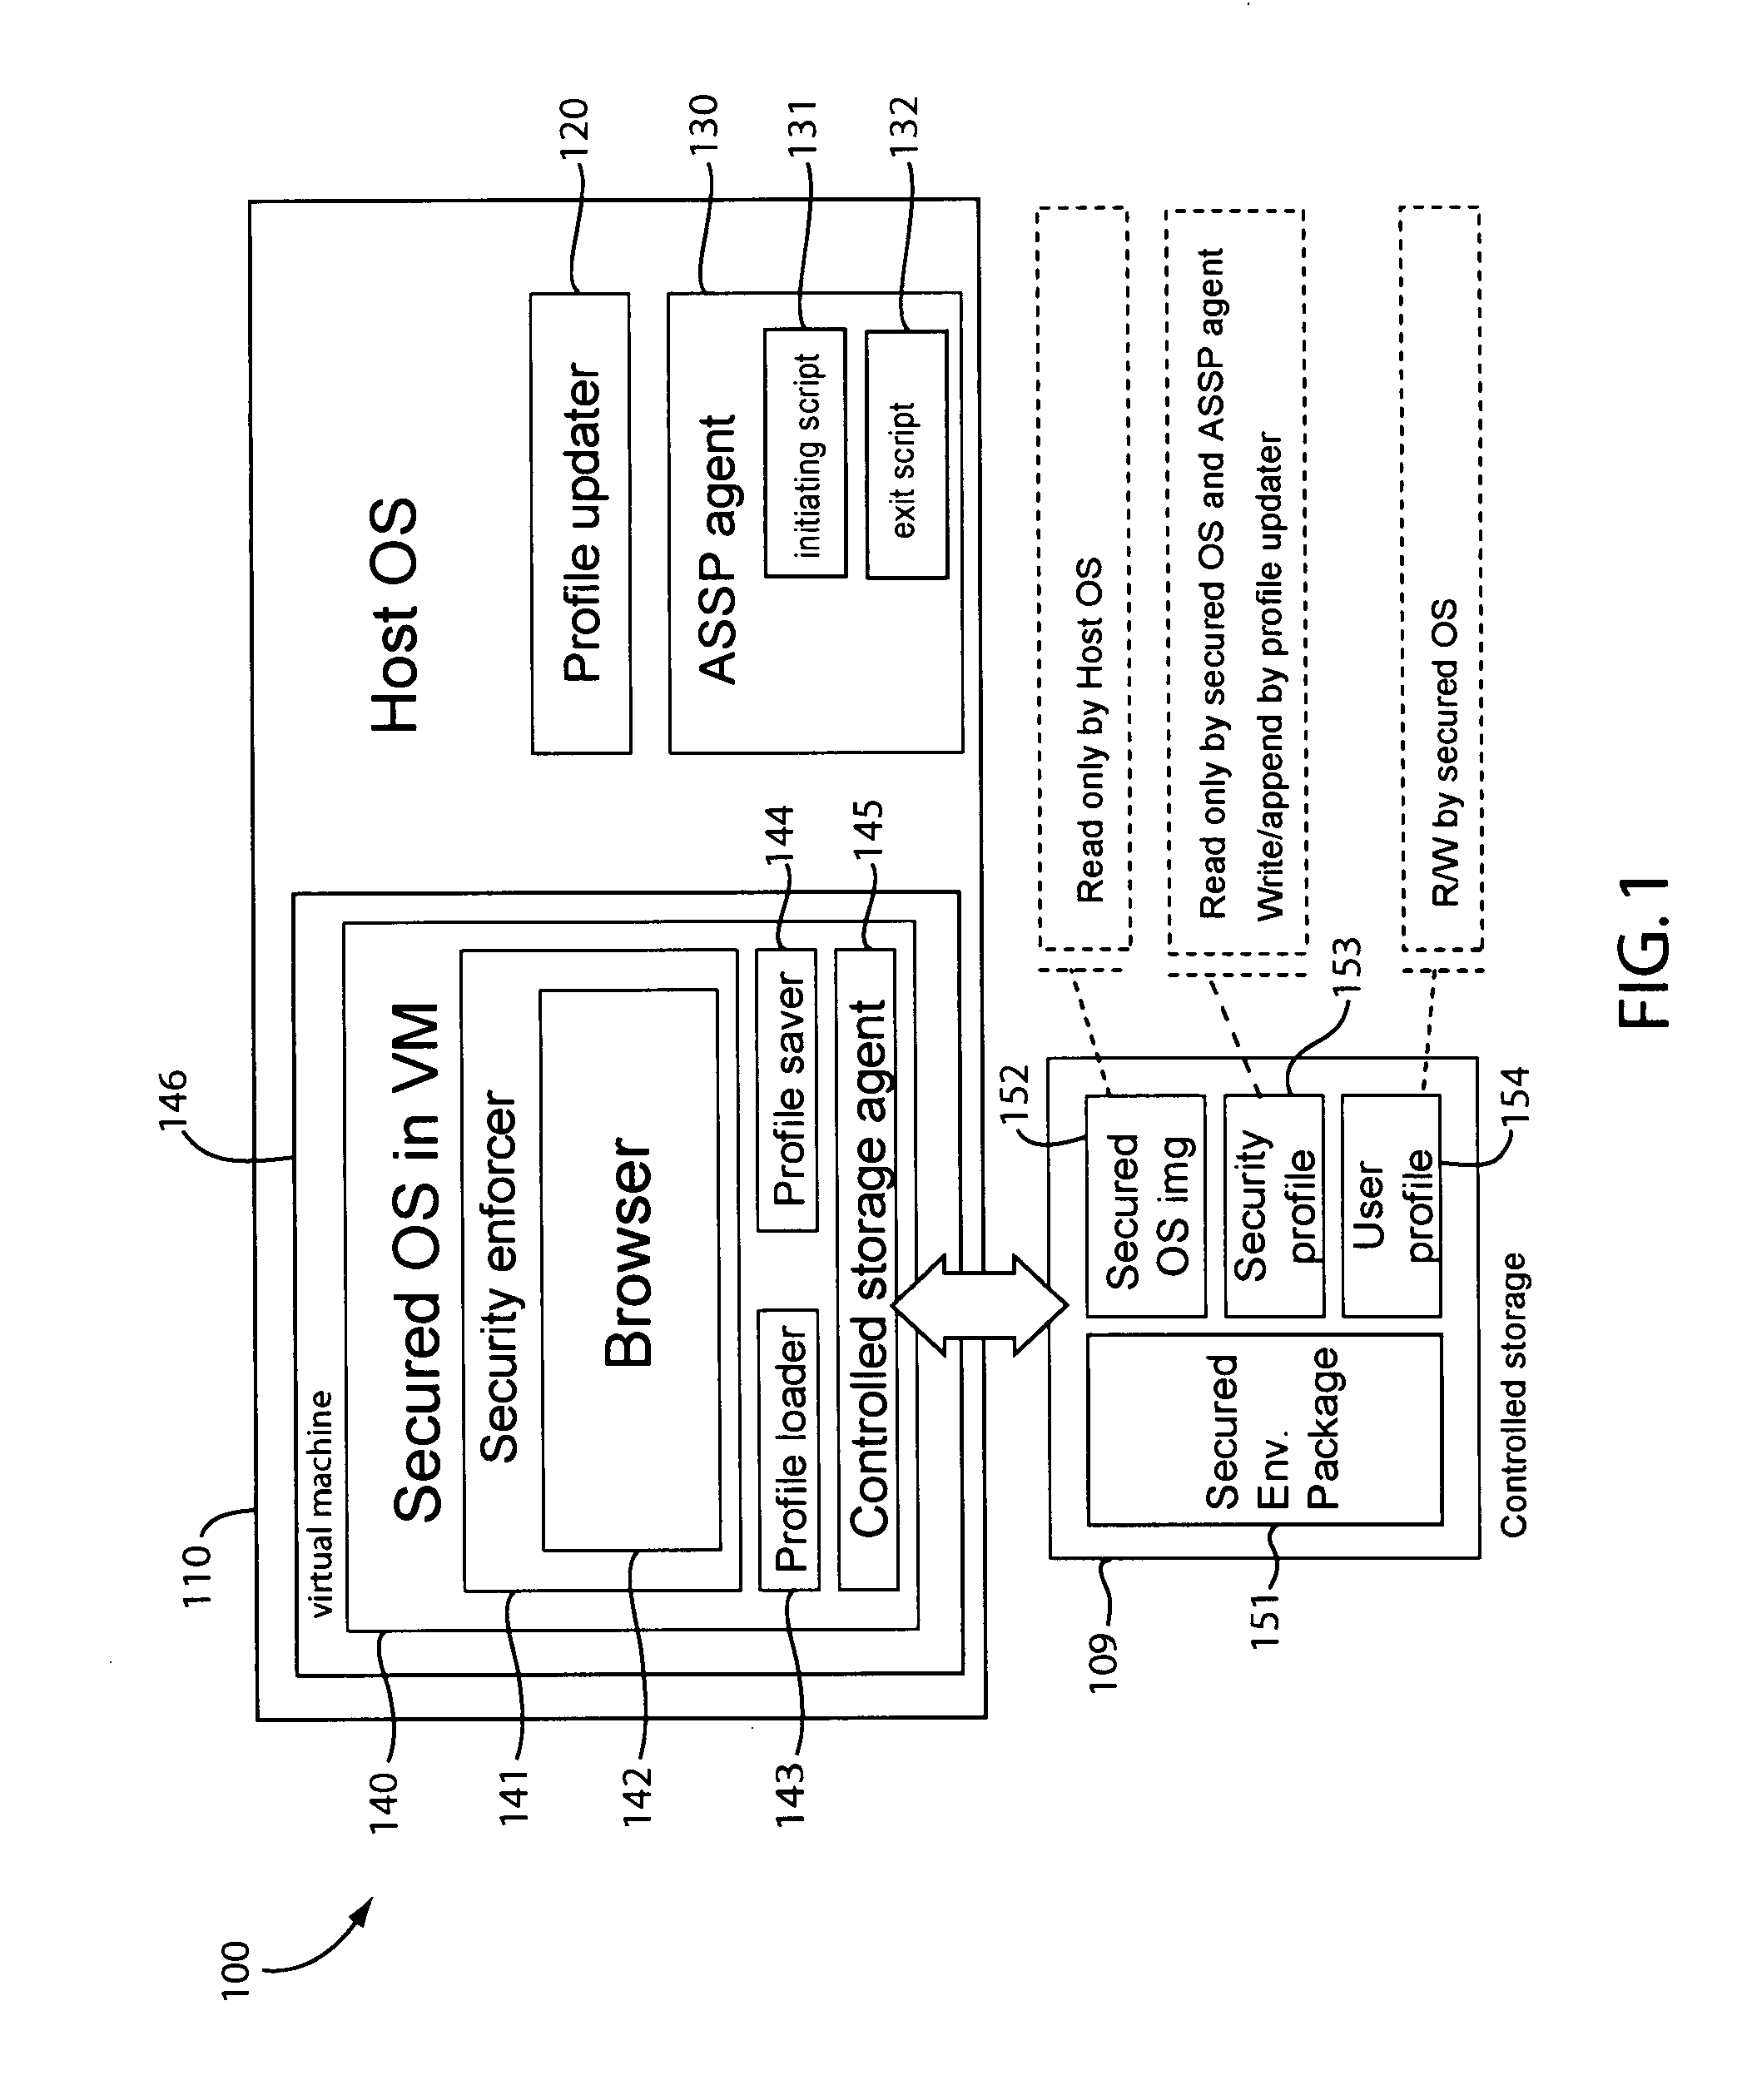 Portable secured computing environment for performing online confidential transactions in untrusted computers